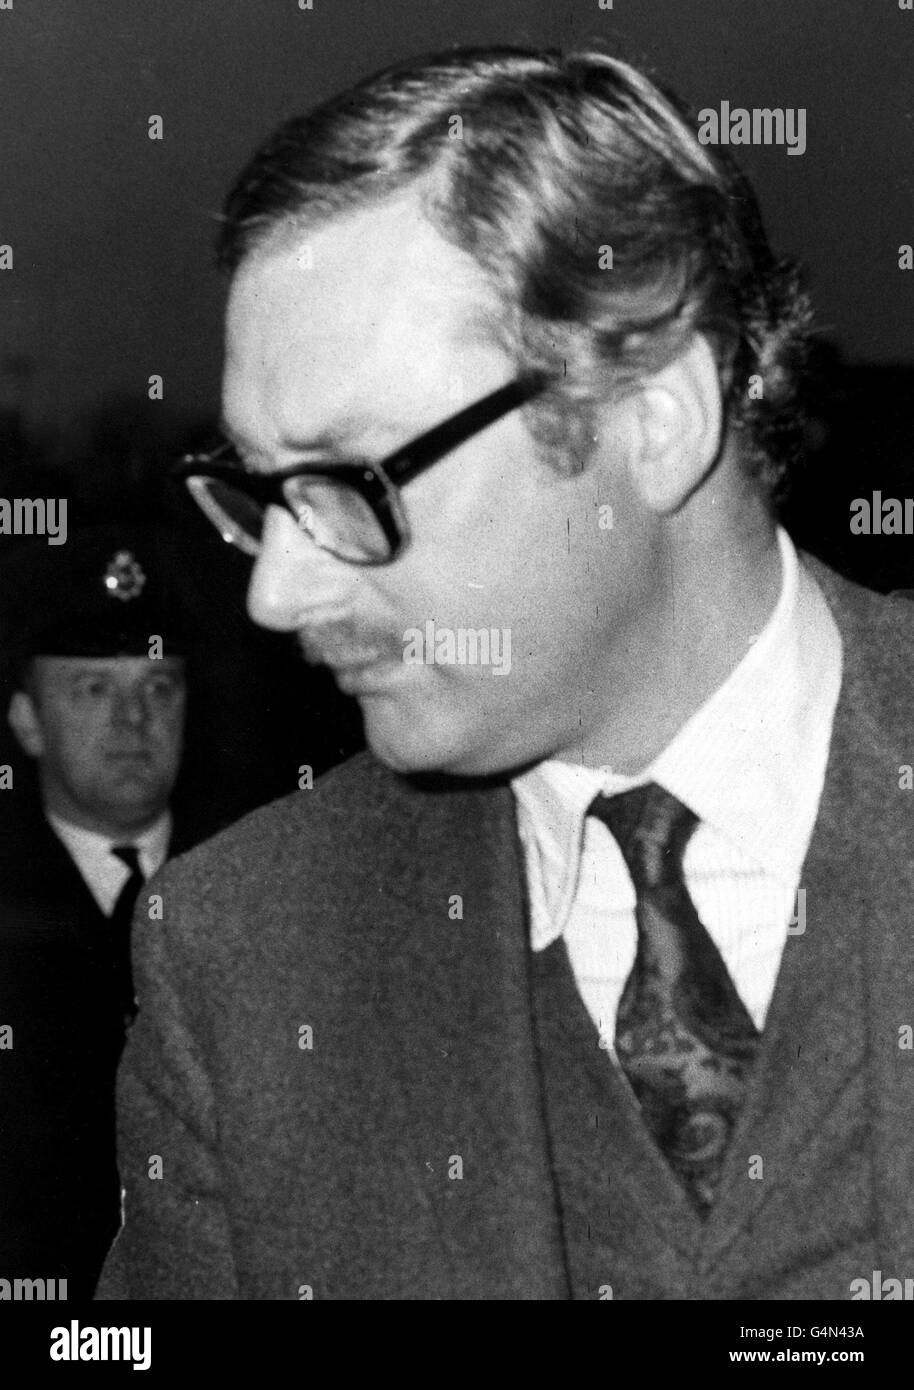 Bruce Reynolds at Linslade, Bedfordshire, who was remanded for a third time, accused of being concerned in the Great Train Robbery in 1963. He was remanded in custody until 4/12/68 after a two minute hearing. 28/12/68: The case will be heard in January 1969. * 8/8/99: Reynolds, one of the guests at the 70th birthday party of Ronnie Biggs, 36 years to the day since the infamous crime which made their name. Biggs, who escaped from Wandsworth Prison in 1965, is reported to be hosting a birthday party at his modest home in Rio de Janeiro, where he has lived beyond the clutches of the British Stock Photo